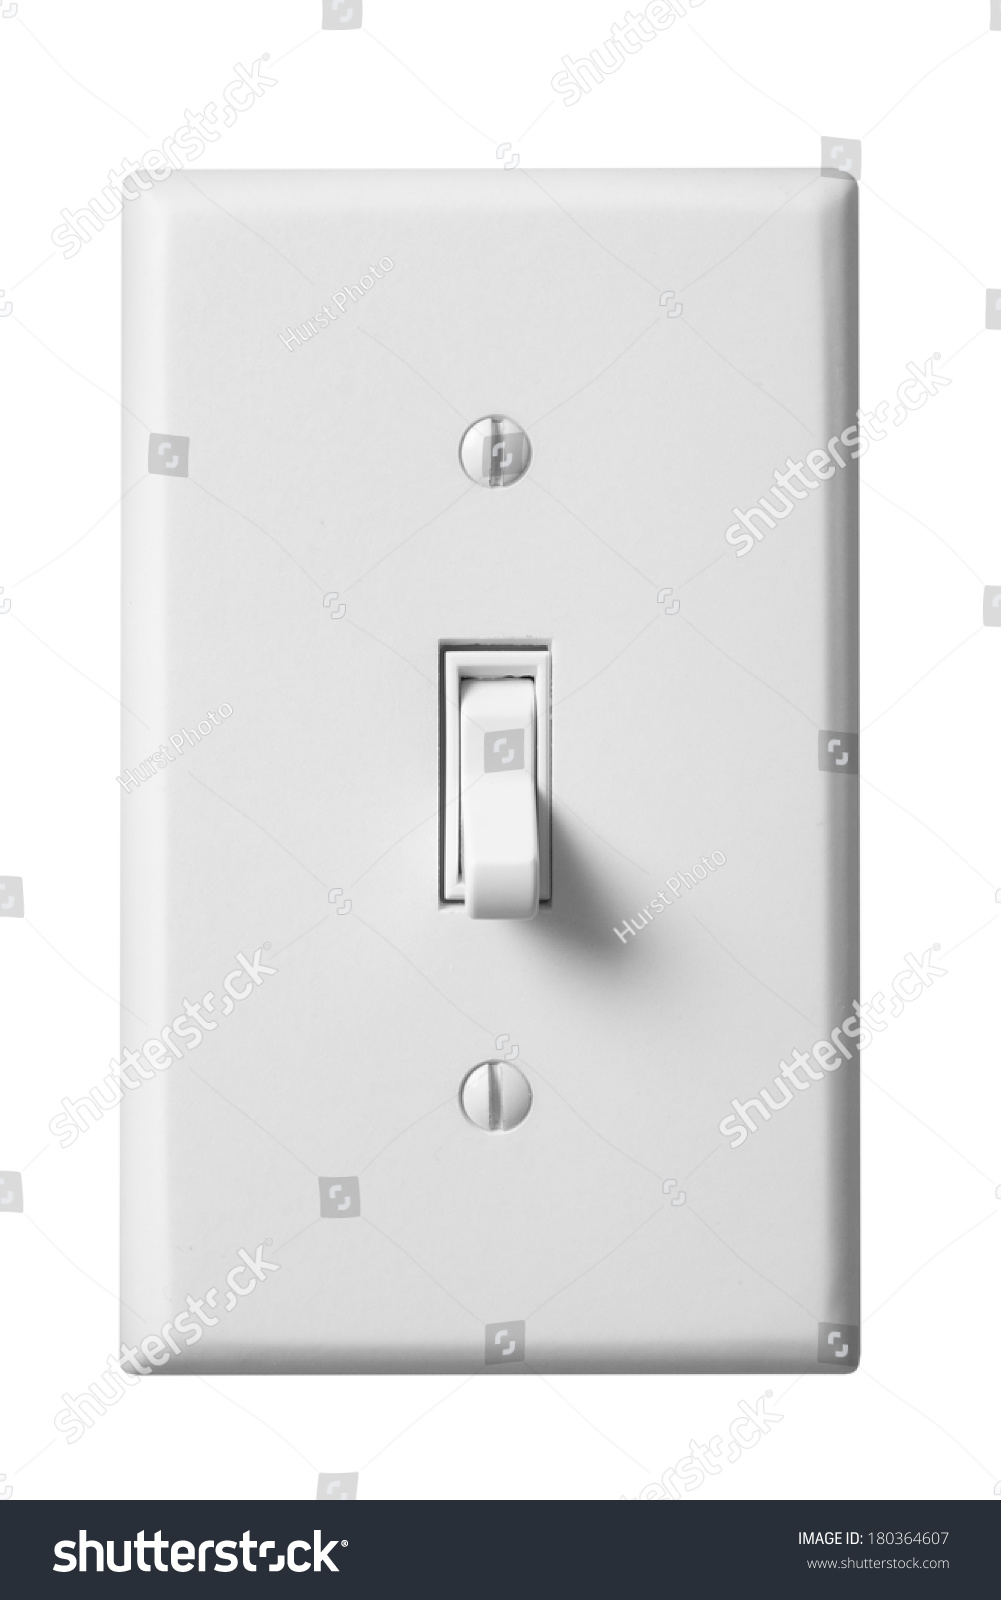 White light switch and faceplate on white background #180364607